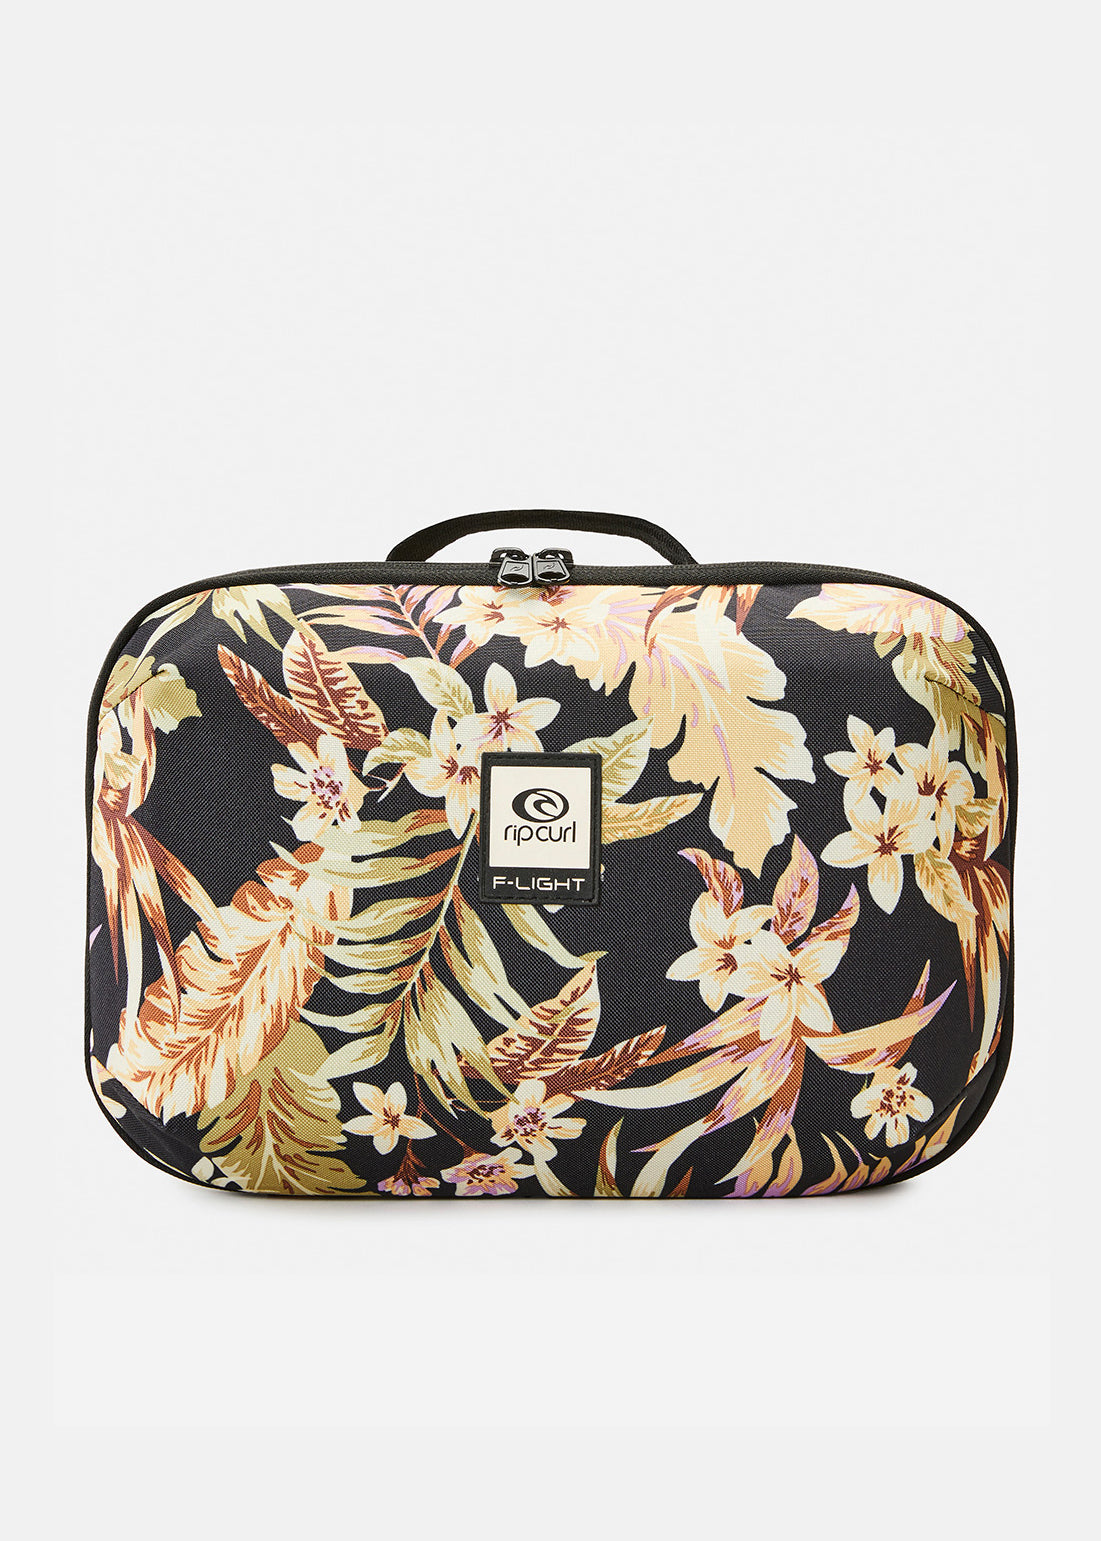 Load image into Gallery viewer, Paradise F-Light Ultimate Beauty Case by Rip Curl
